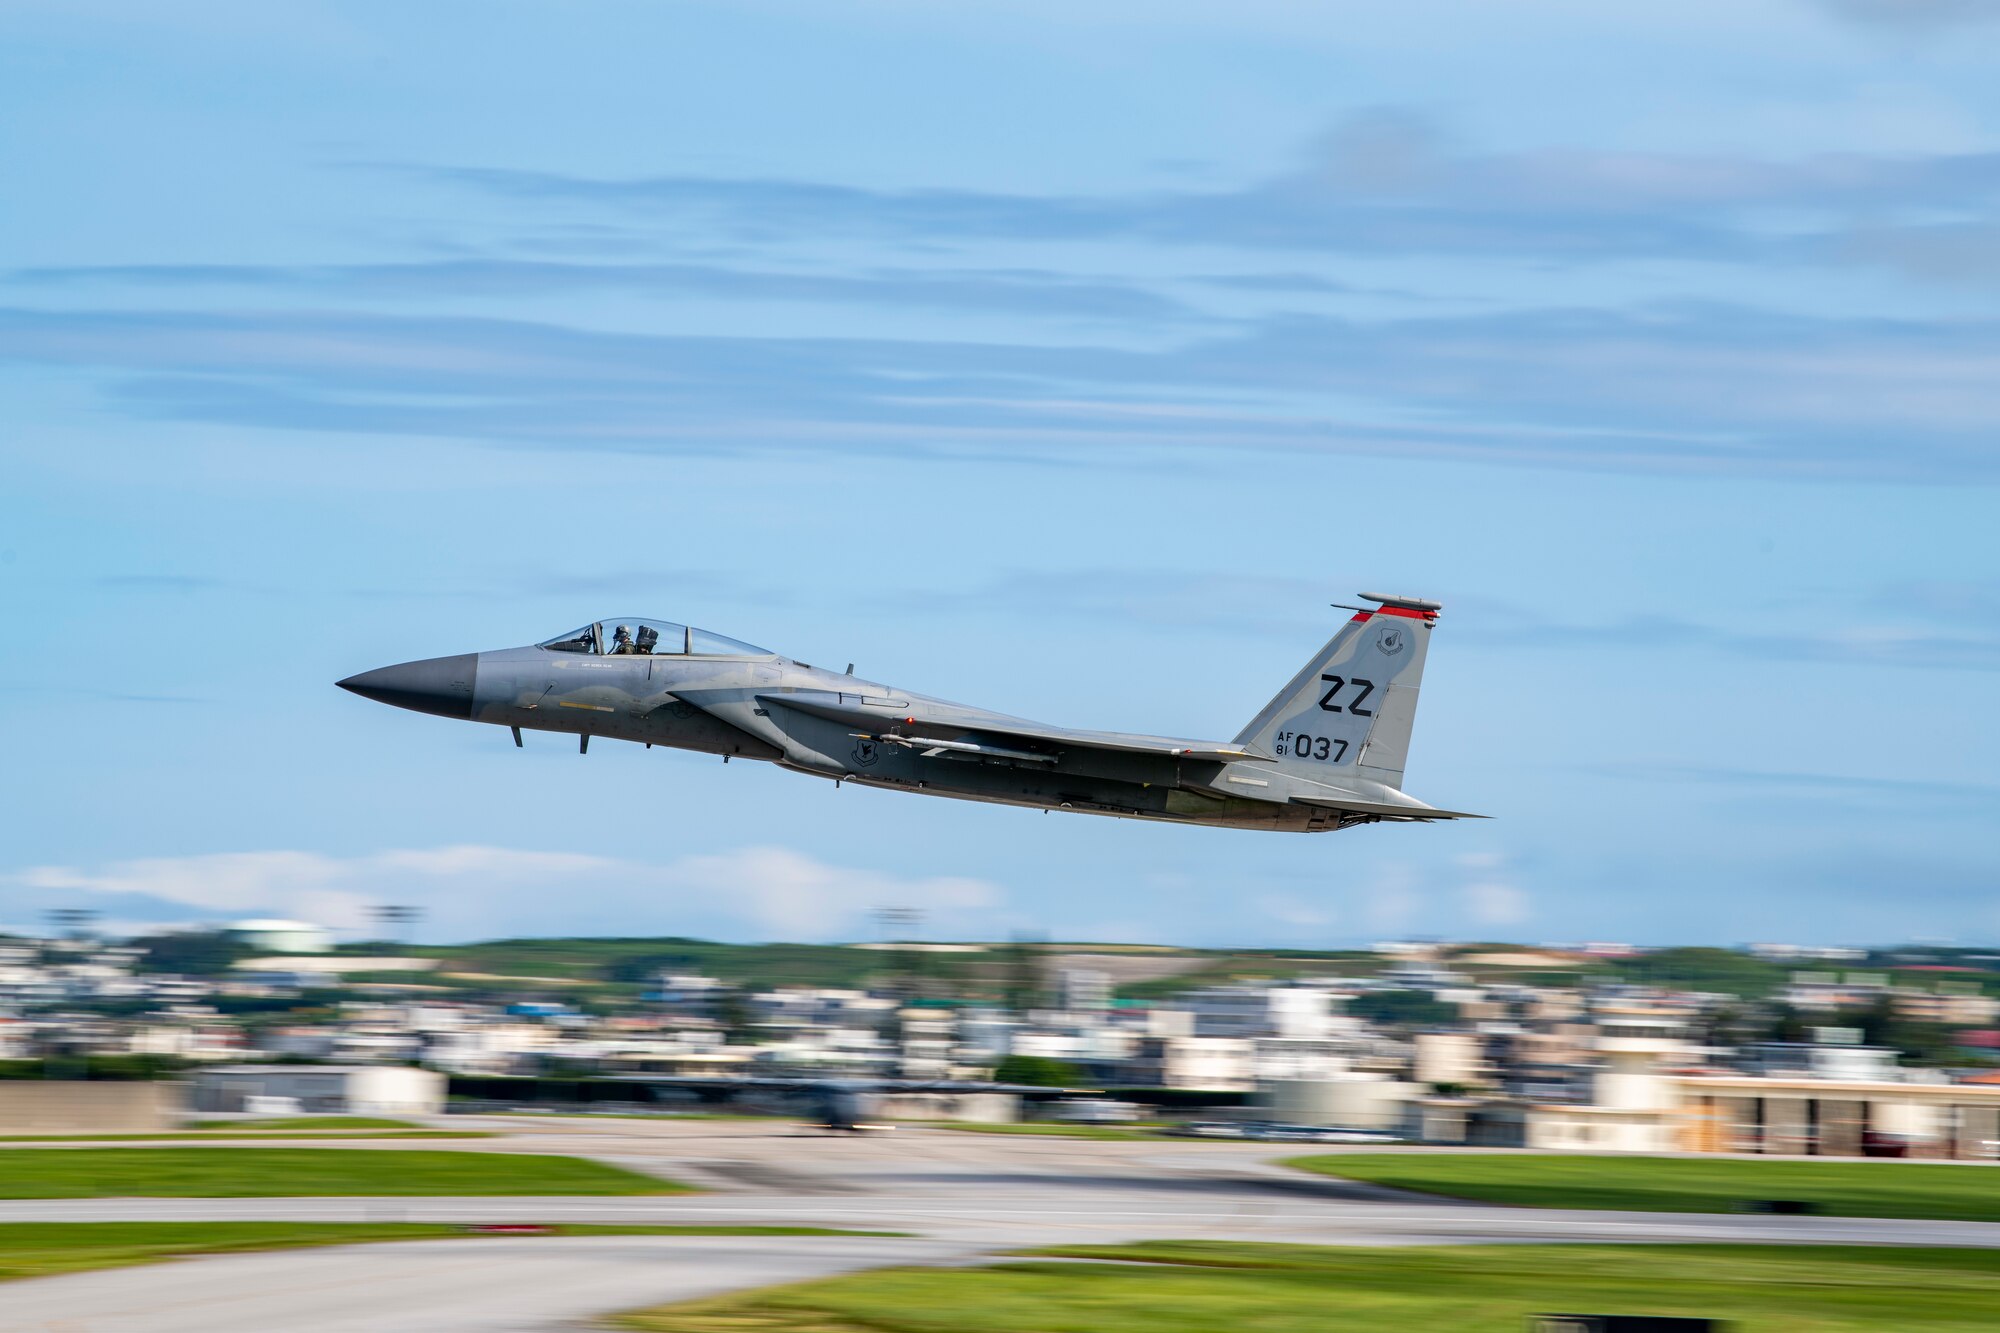 A F-15C Eagle assigned to the 44th Fighter Squadron takes off during a training mission.